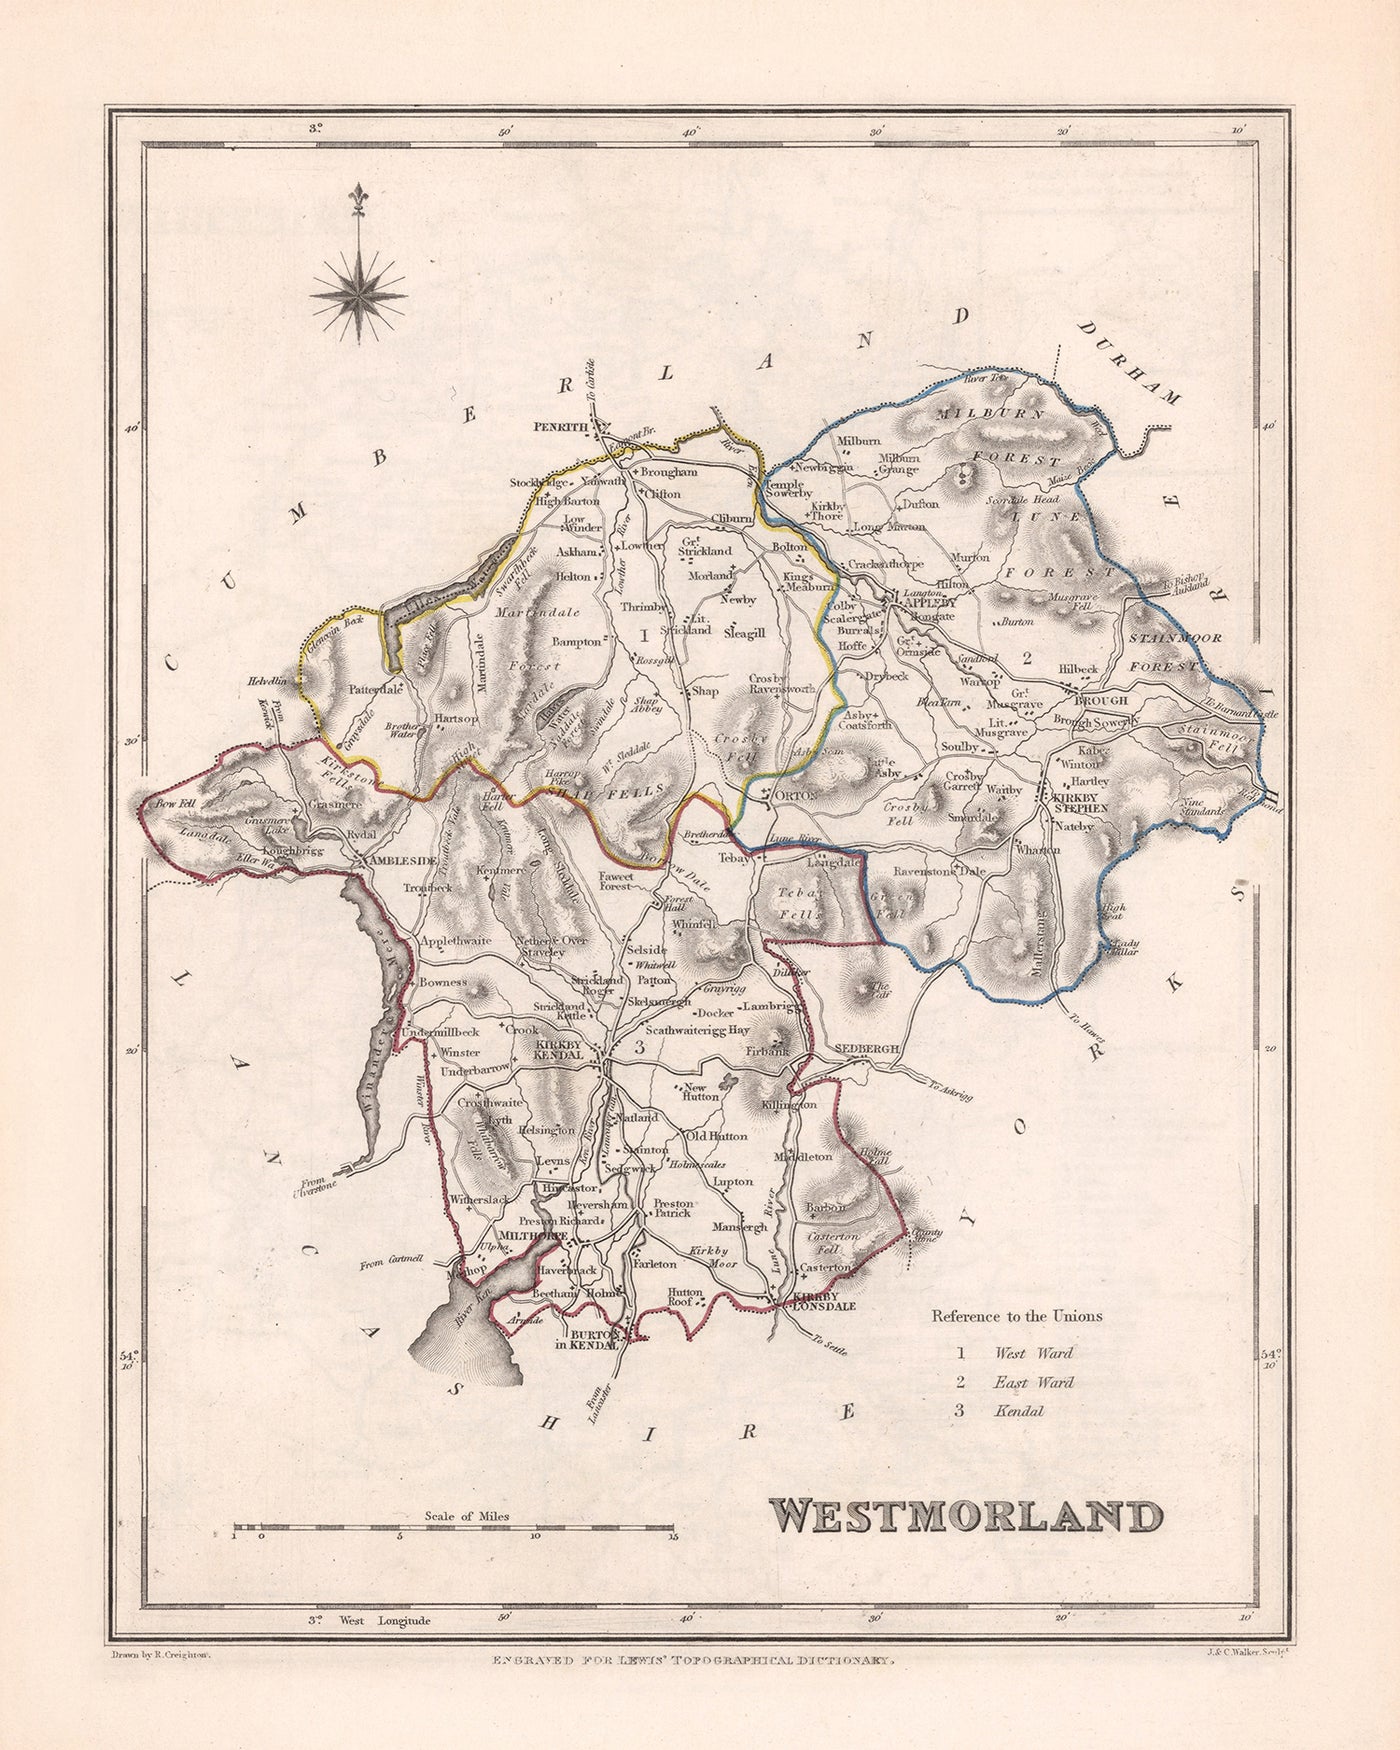 Old Map of Westmorland by Samuel Lewis, 1844: Appleby, Kendal, Kirkby Stephen, Brough, Lake District